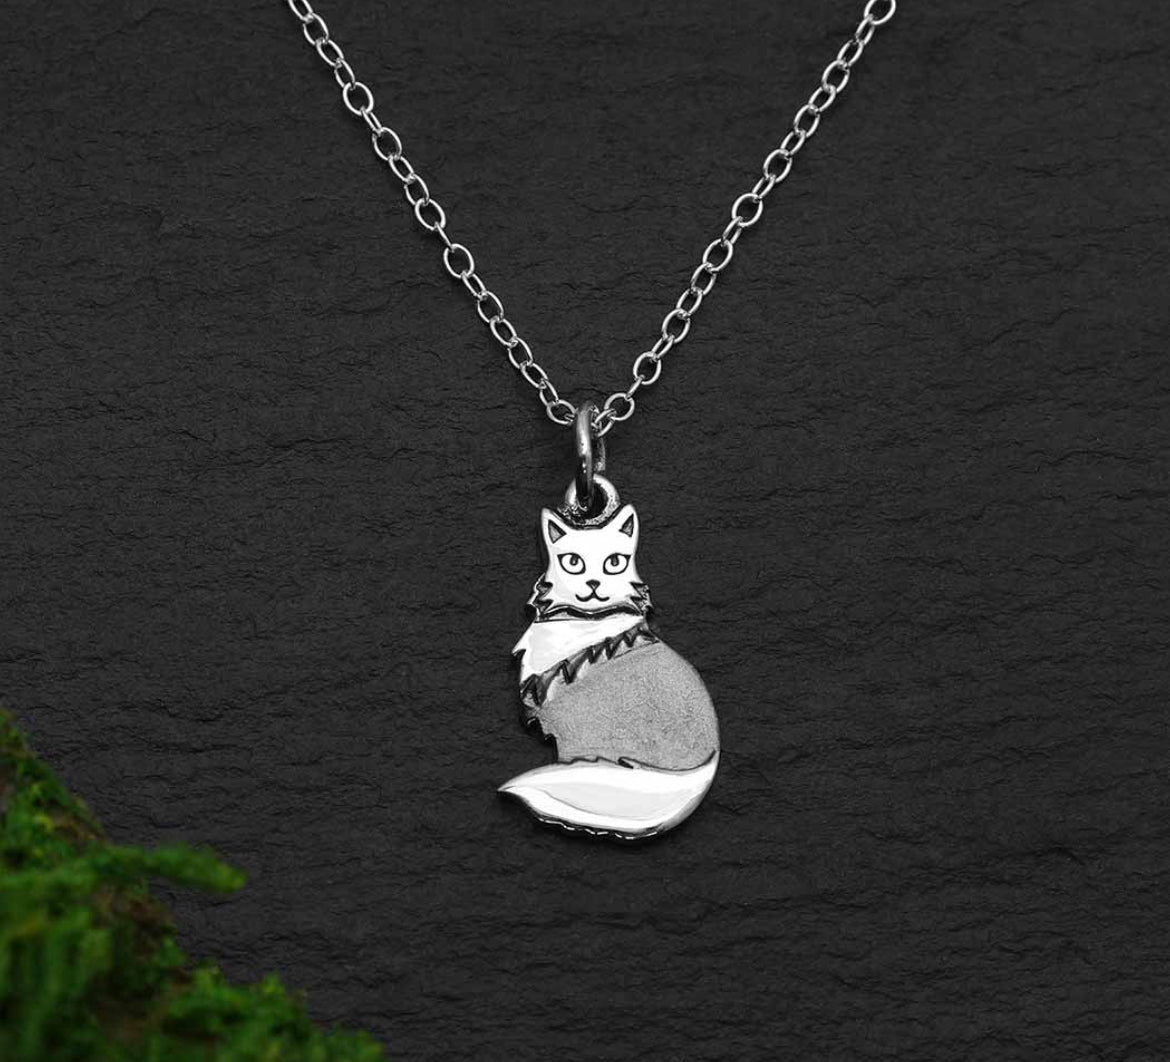 Sterling silver fluffy cat necklace with 18" sterling silver chain